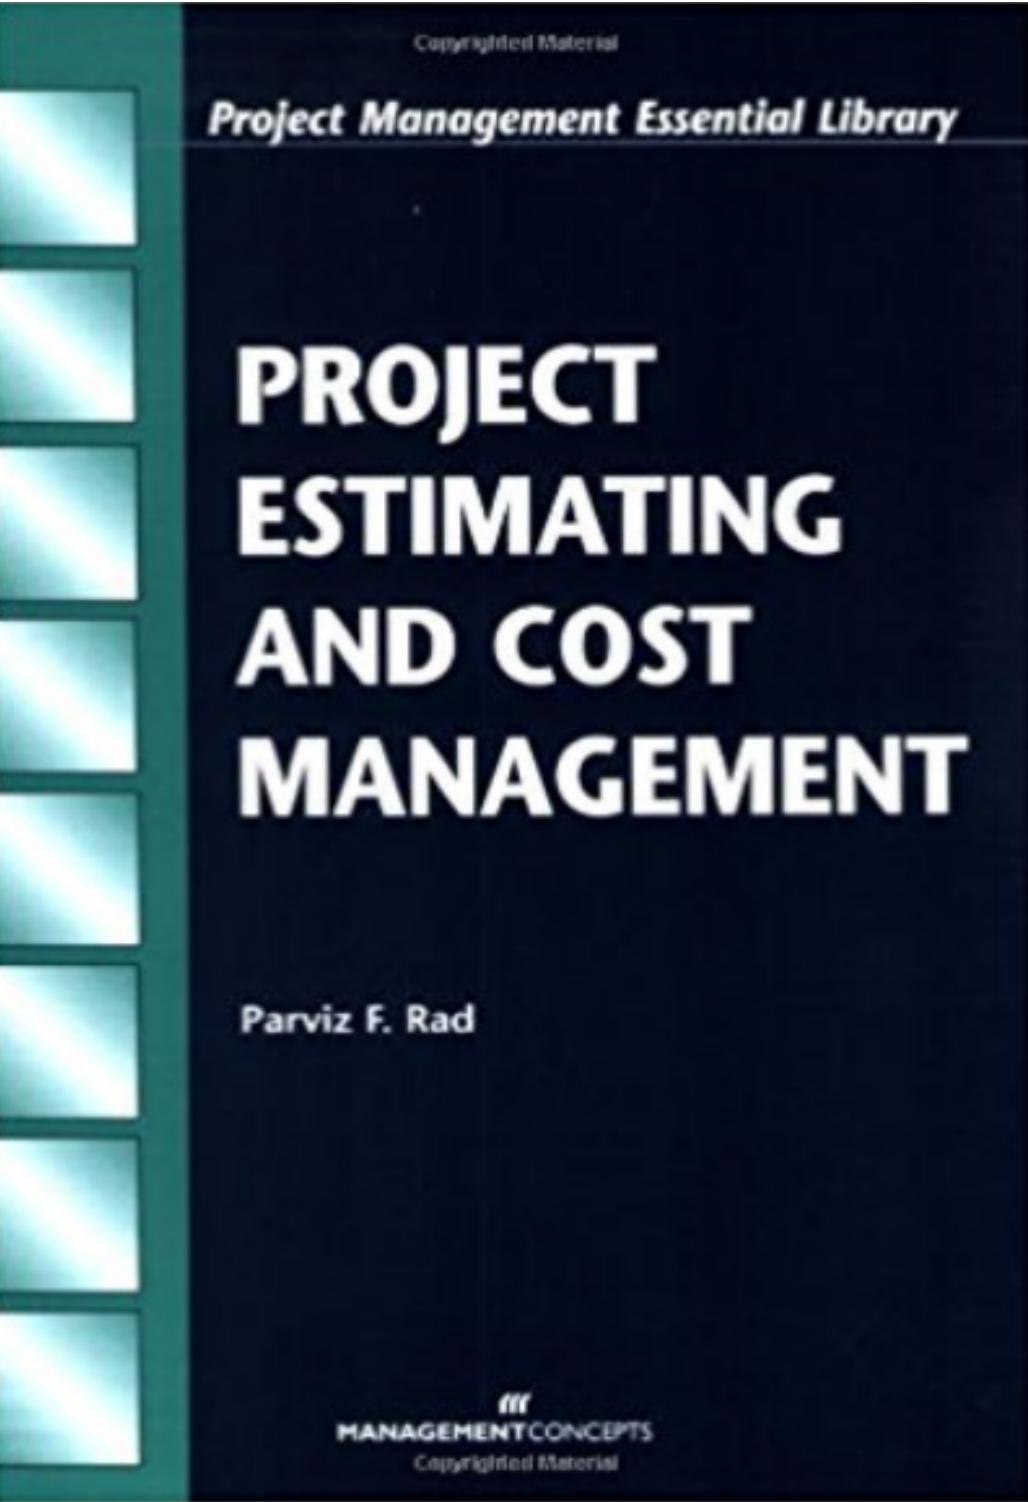 Project Estimating and Cost Management 2002